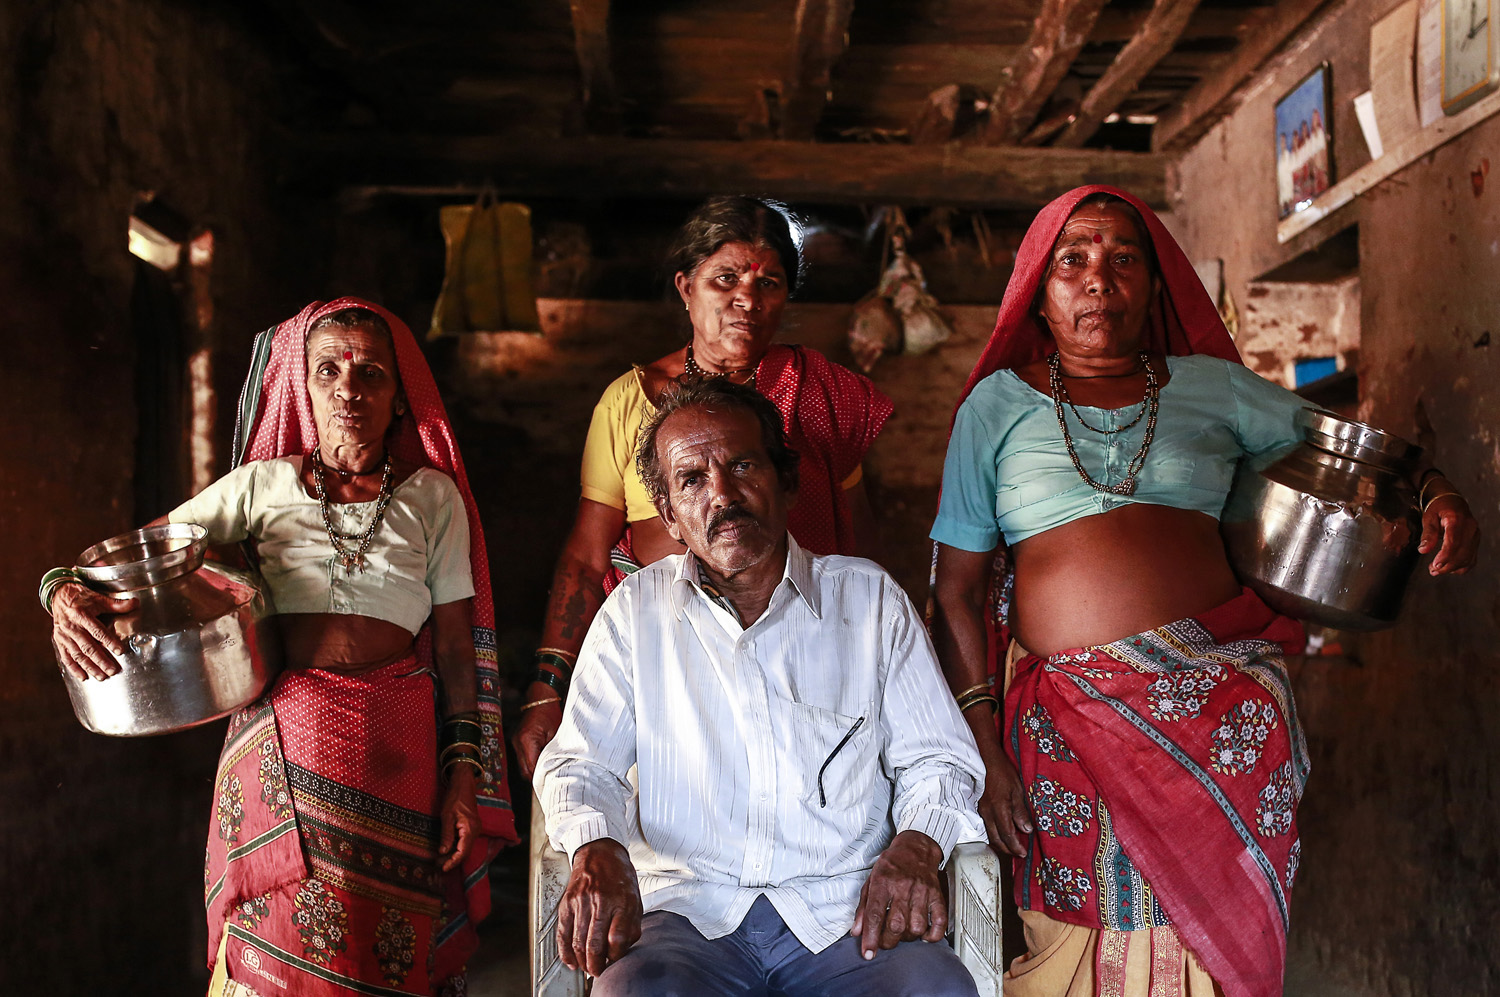  Sakharam Bhagat poses with his wives, Sakhri, Tuki and Bhaagi (L to R) inside their house. 